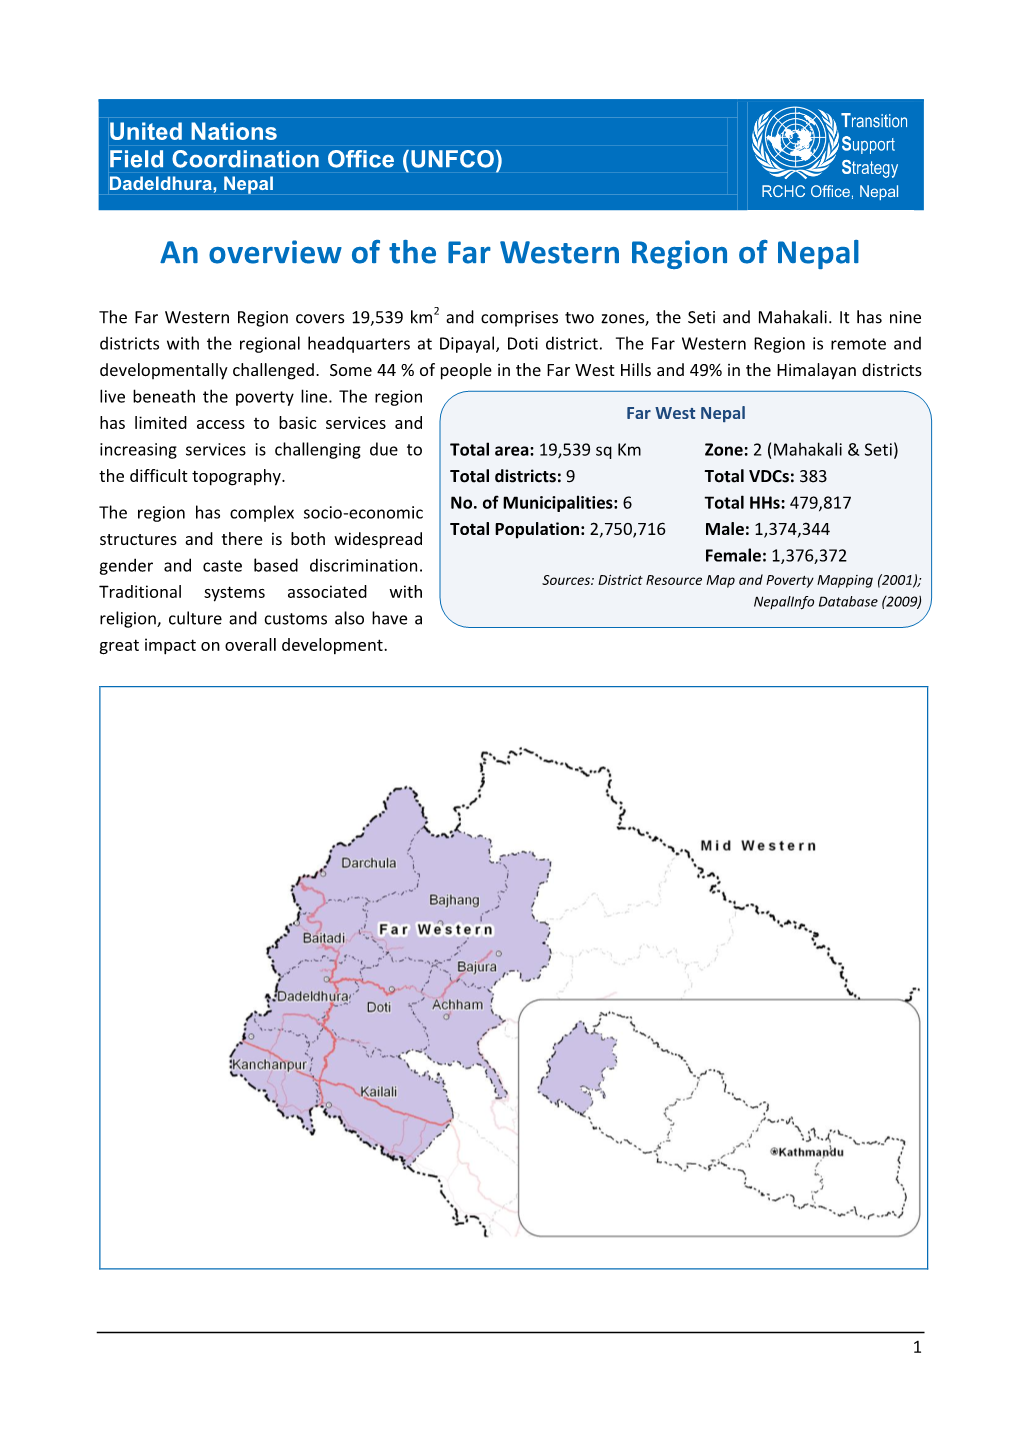 An Overview of the Far Western Region of Nepal